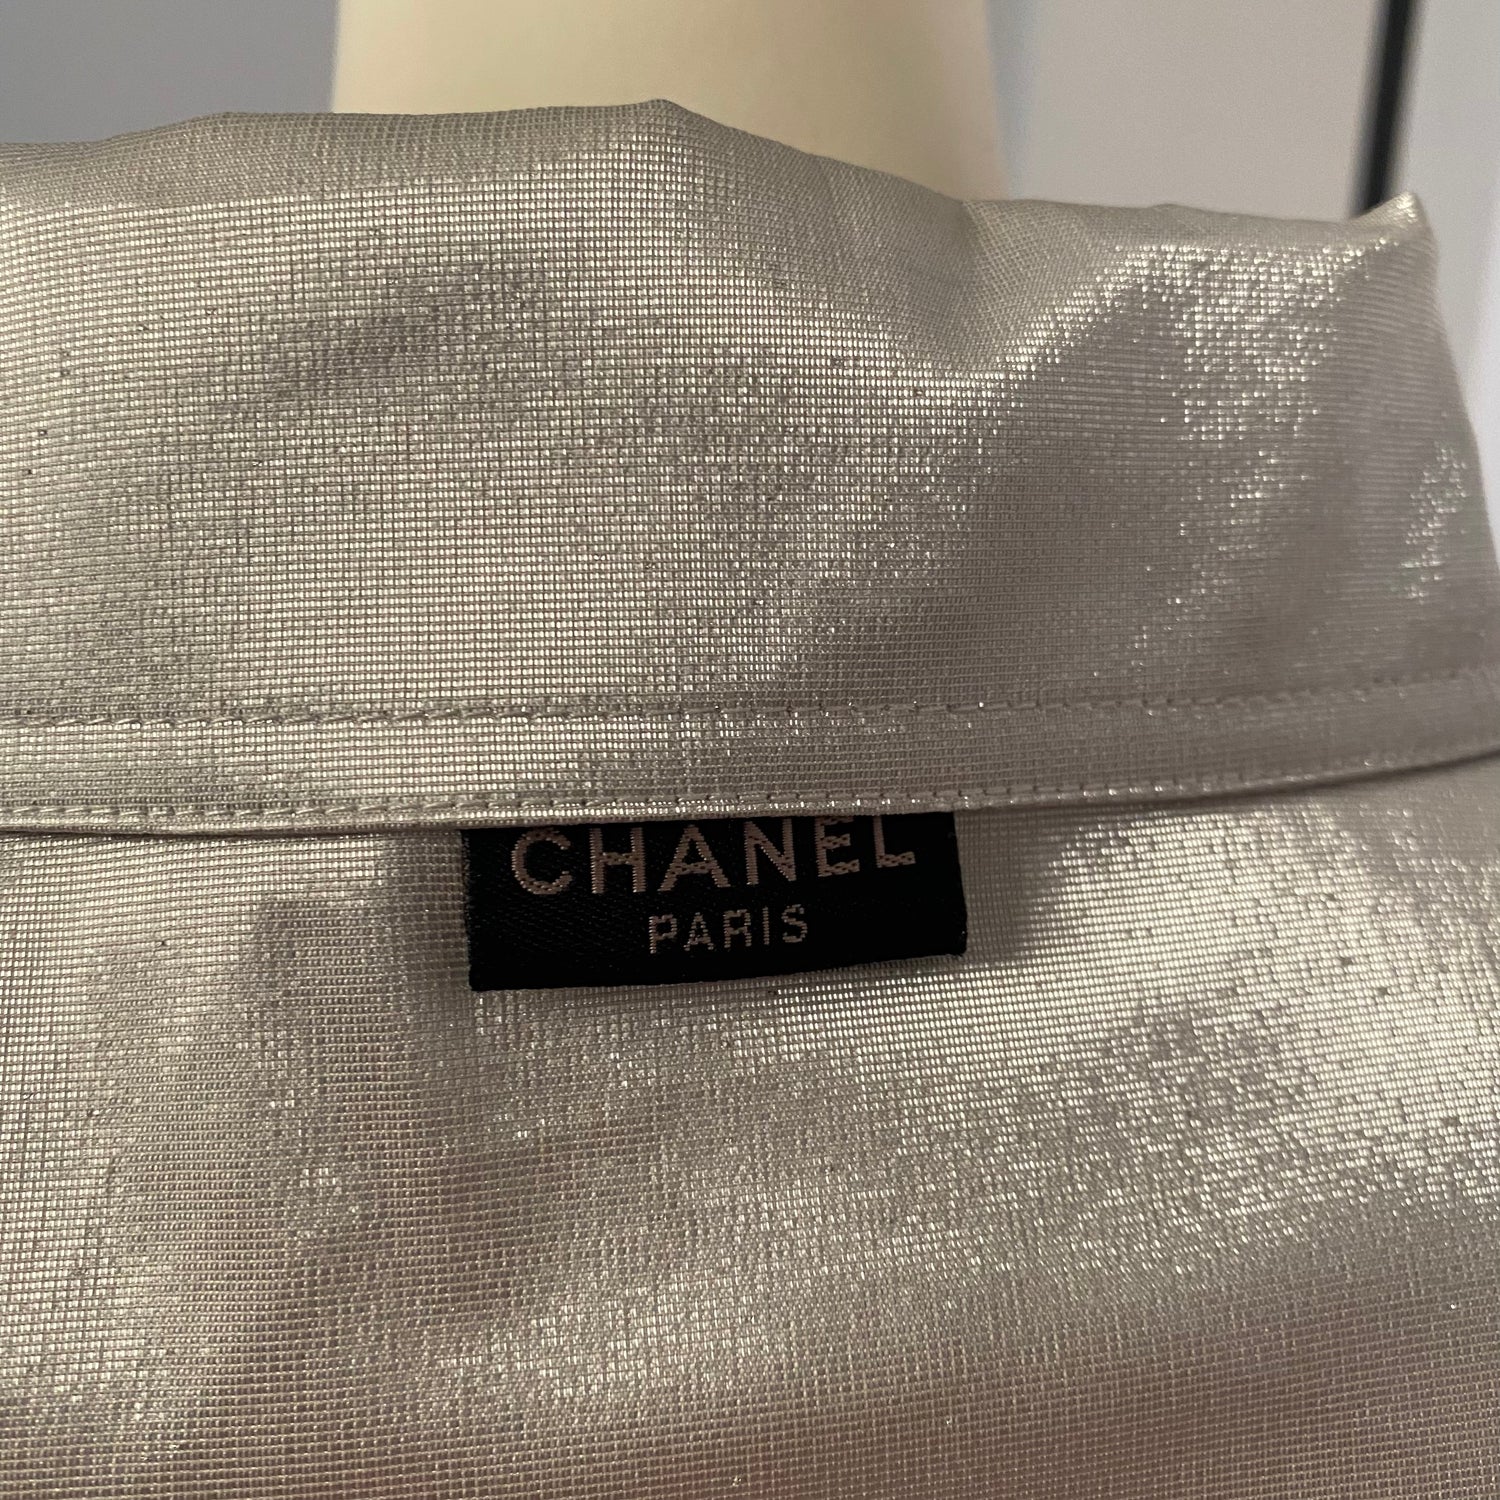 CHANEL Jackets vintage Lysis Paris pre-owned secondhand